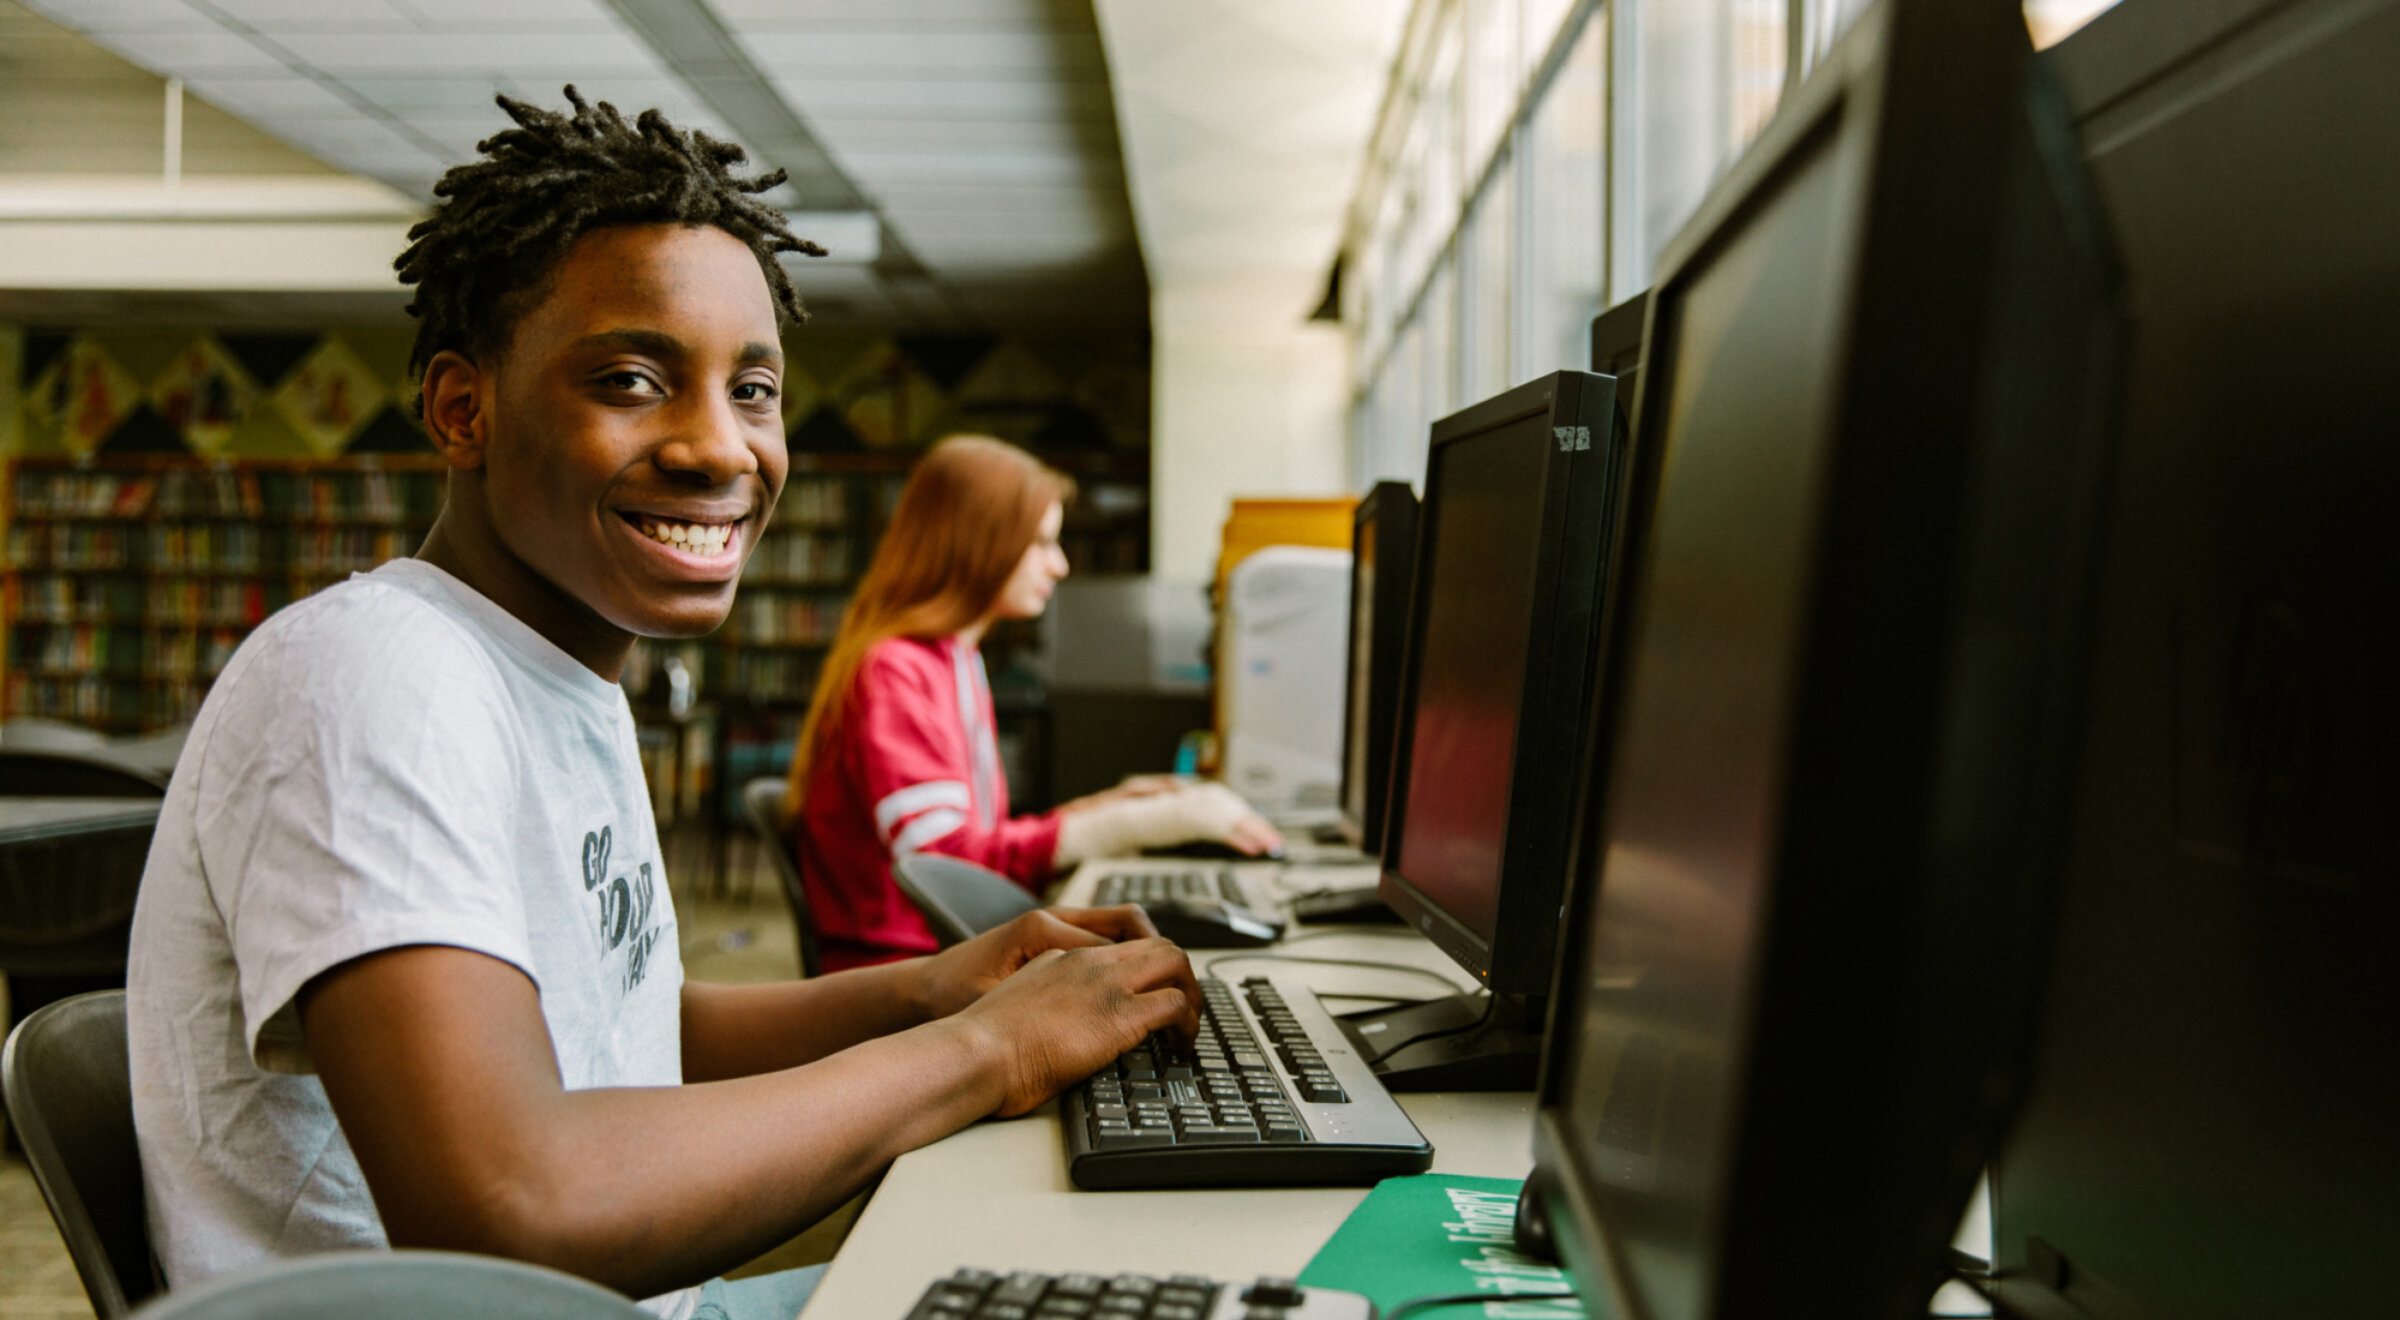 Boy smiling at computer in library